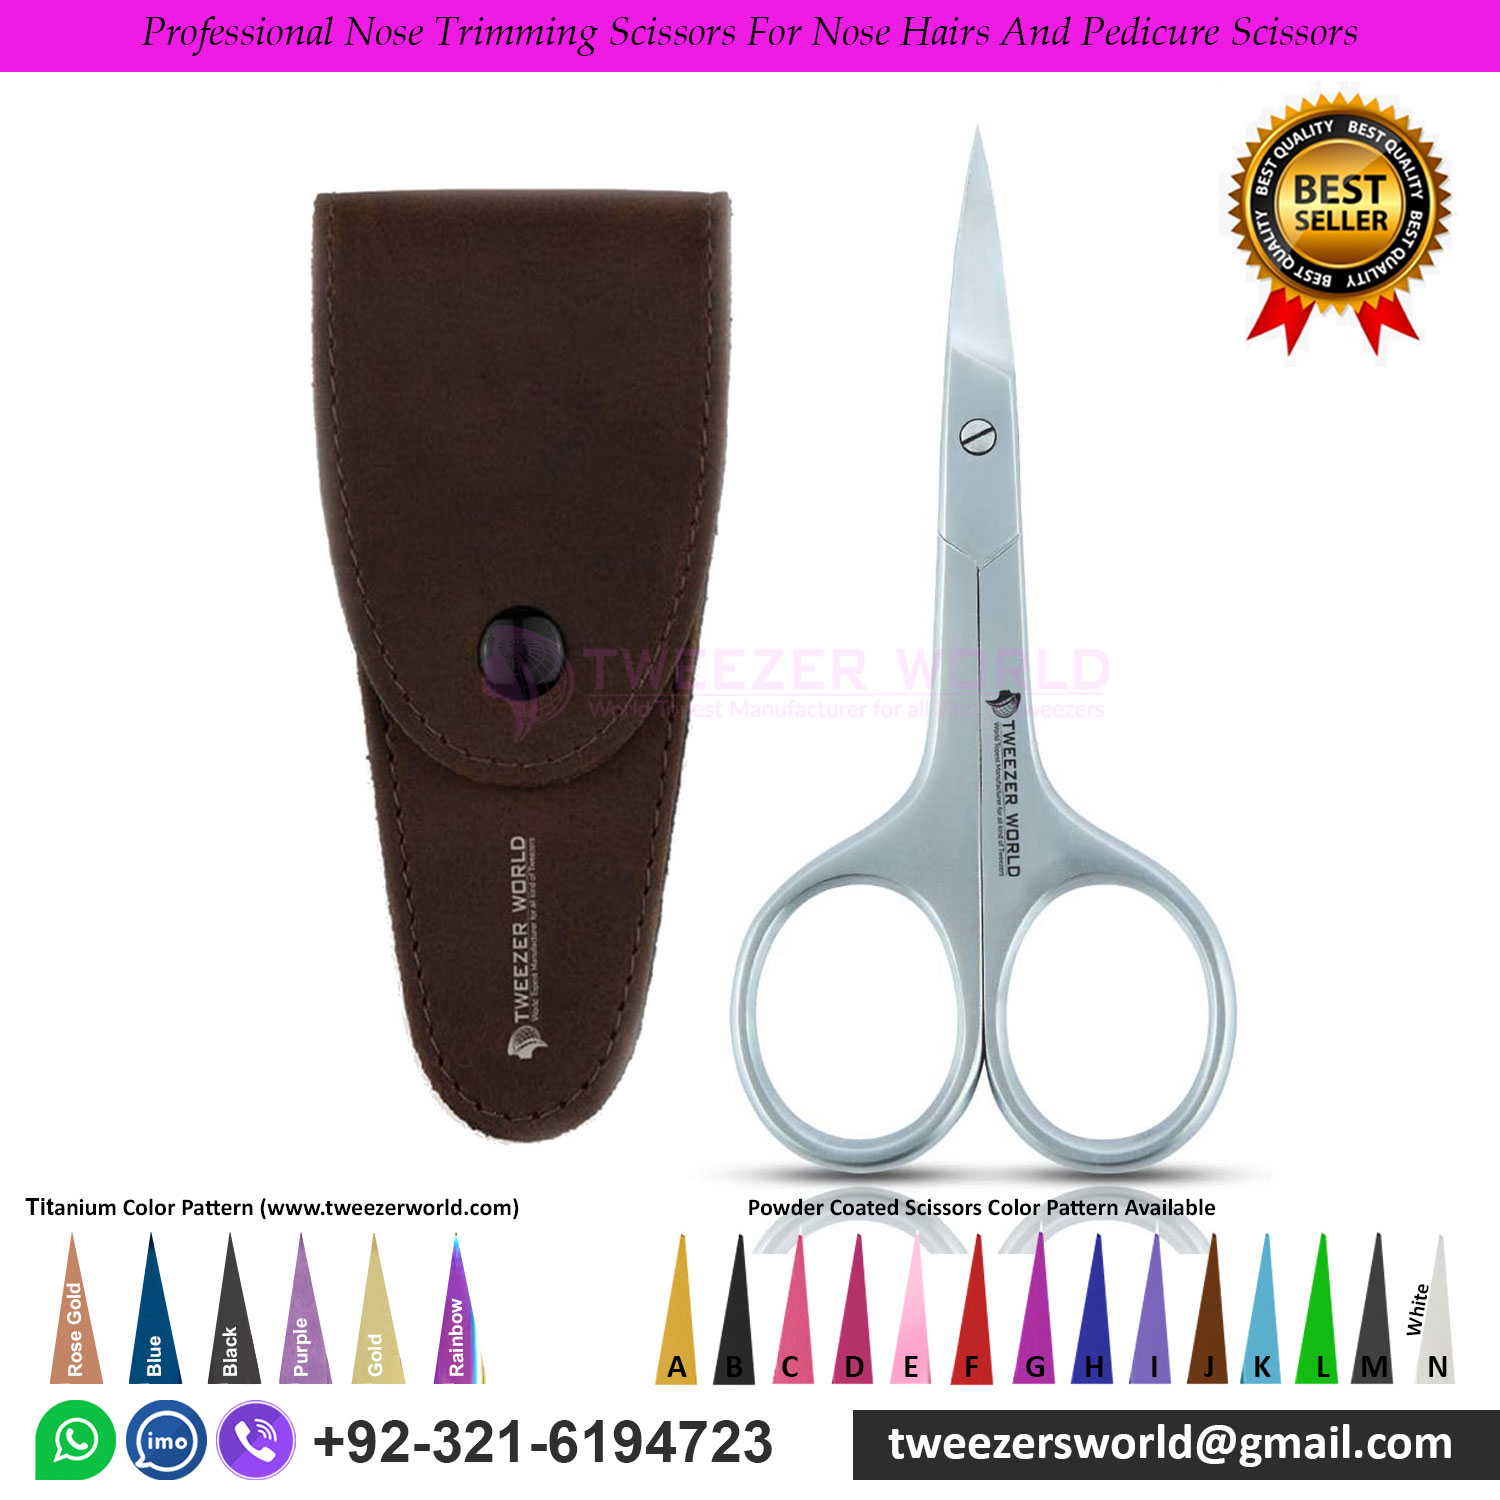 Professional nose trimming scissors for nose hairs and Pedicure scissors